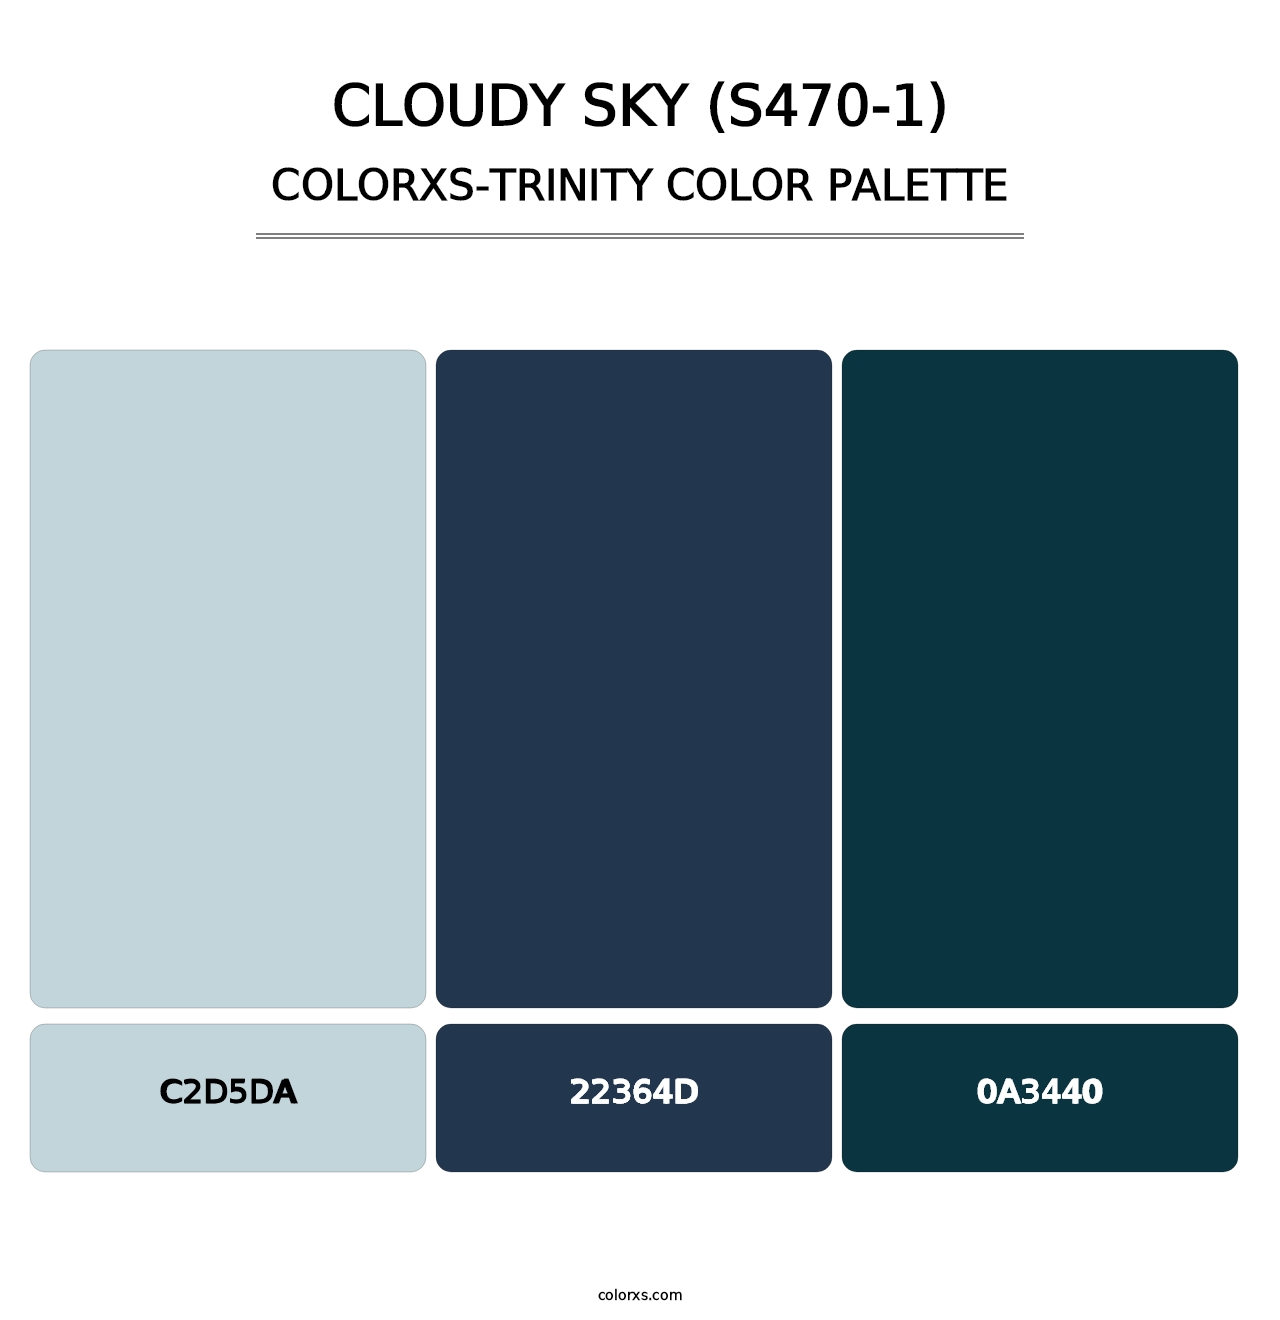 Cloudy Sky (S470-1) - Colorxs Trinity Palette